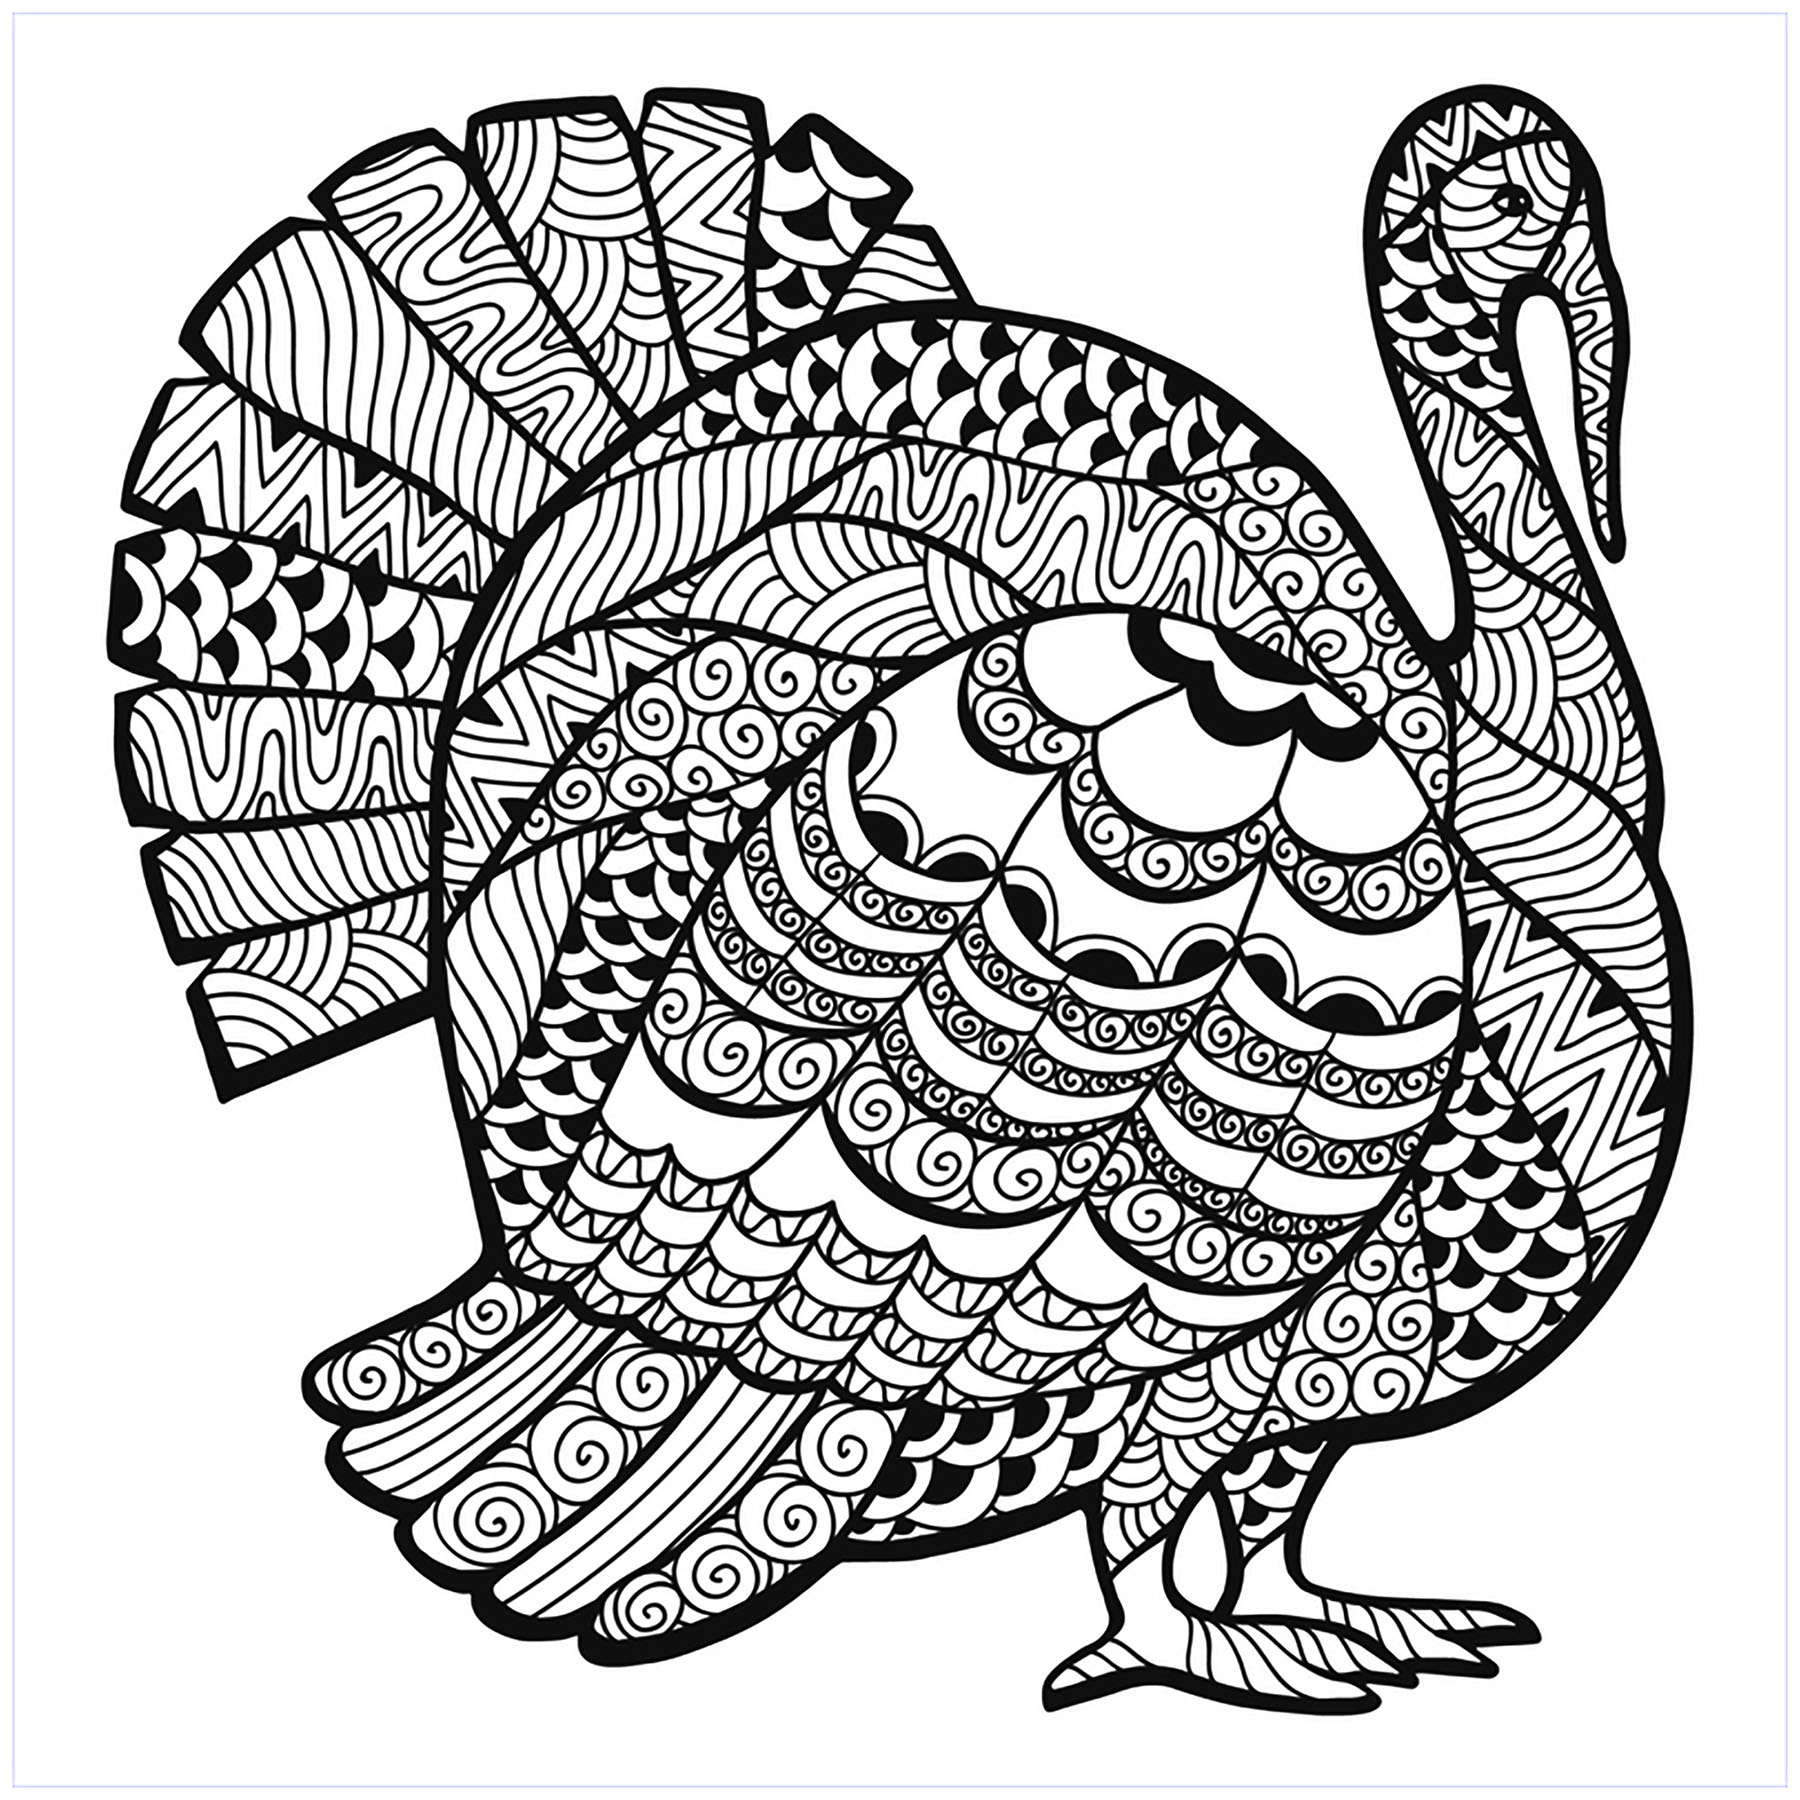 Thanksgiving Image To Print And Color - Thanksgiving Kids Coloring Pages